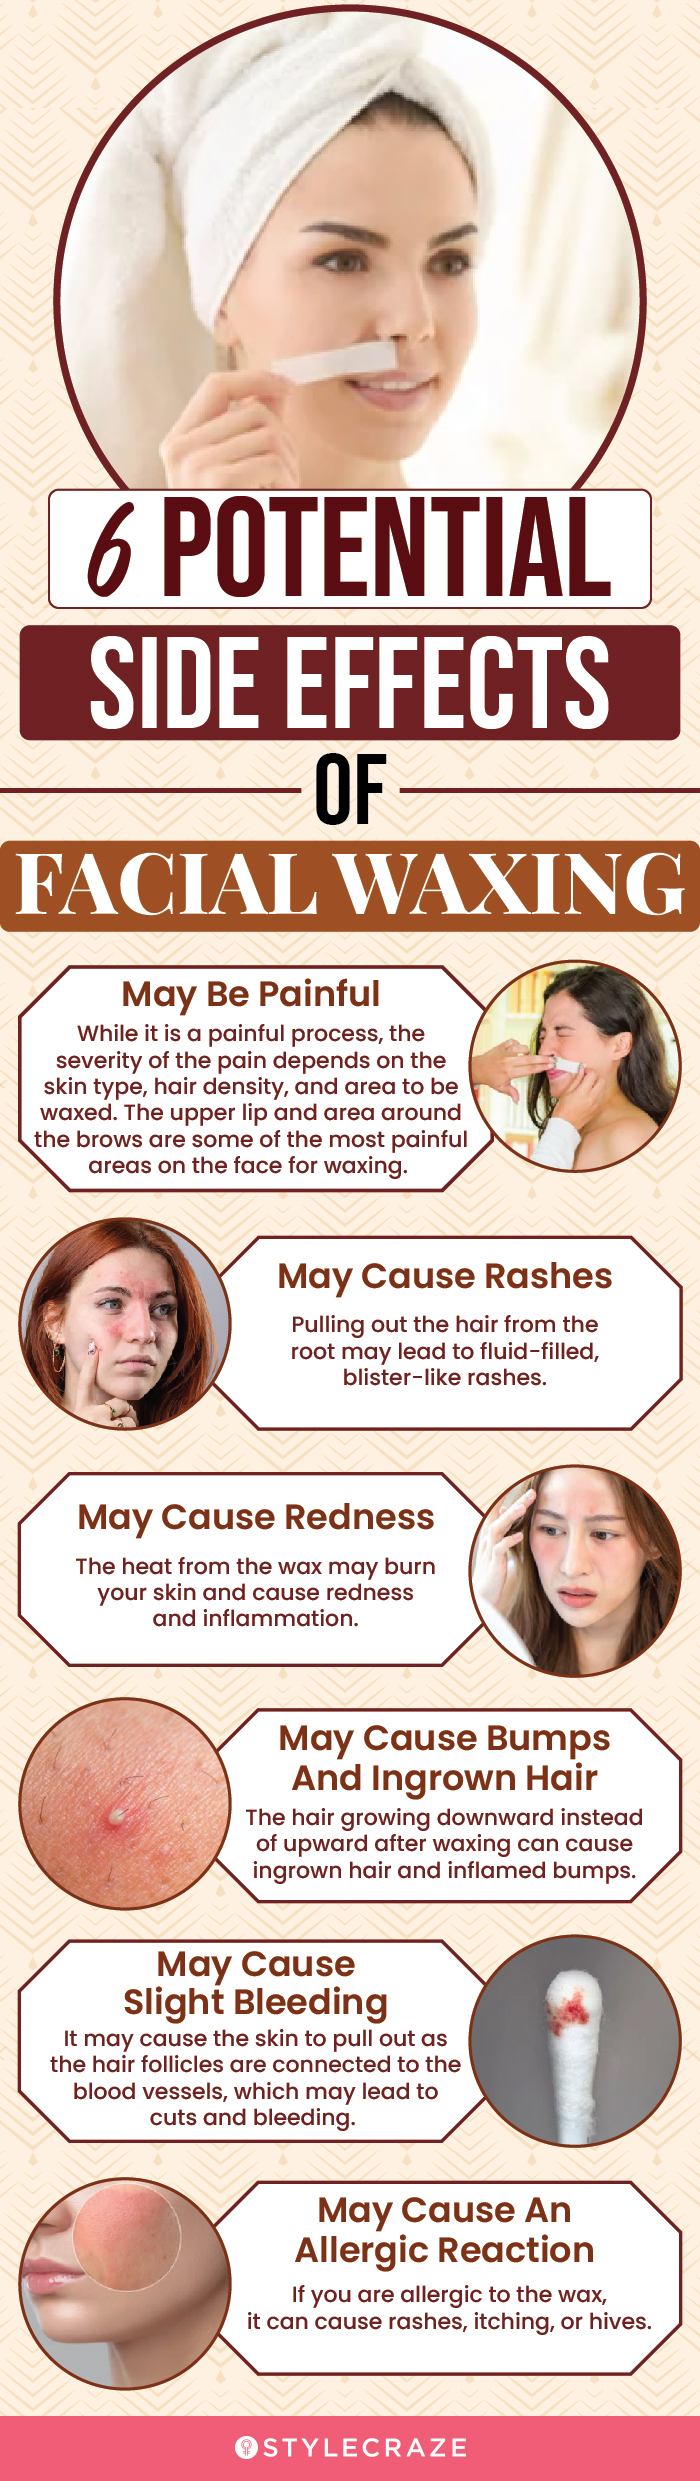 6 potential side effects of facial waxing(infographic)